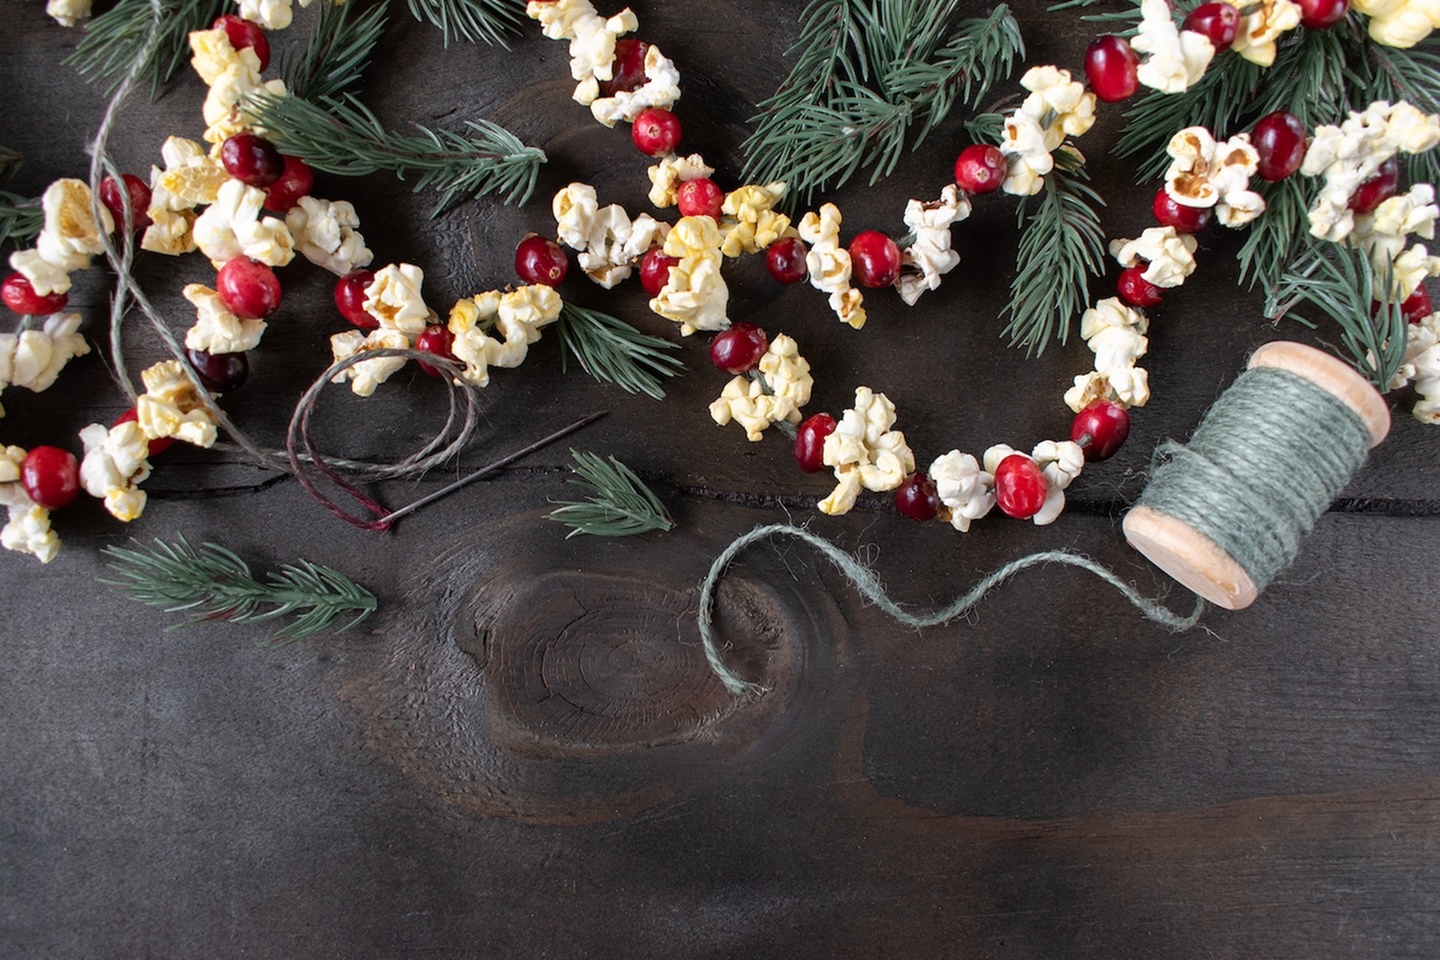 Crafting Cheer: DIY Holiday Decor Ideas to Enchant Your Space-image